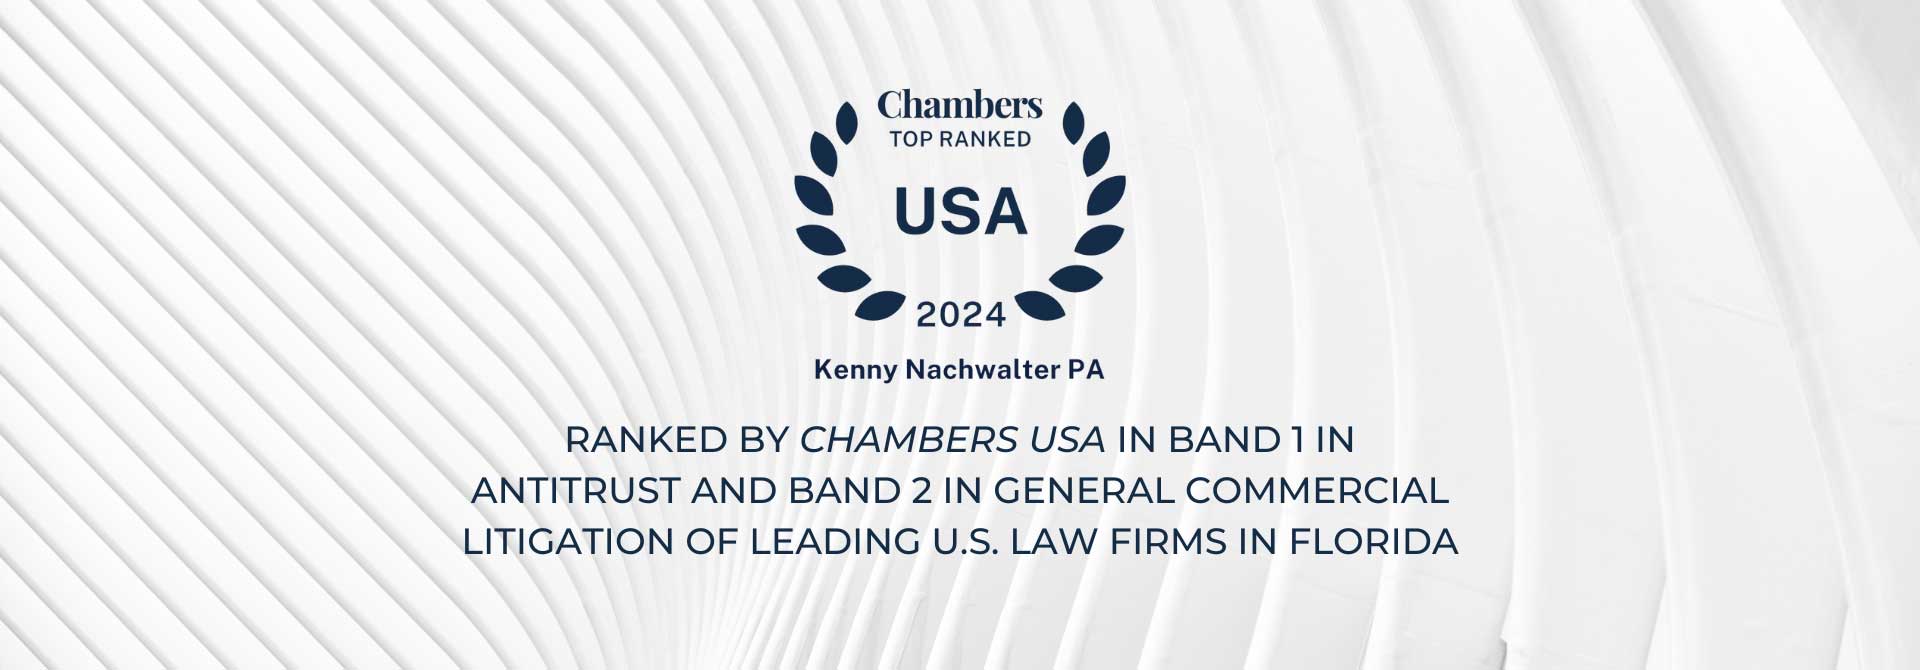 Kenny Nachwalter Chambers Top Ranked